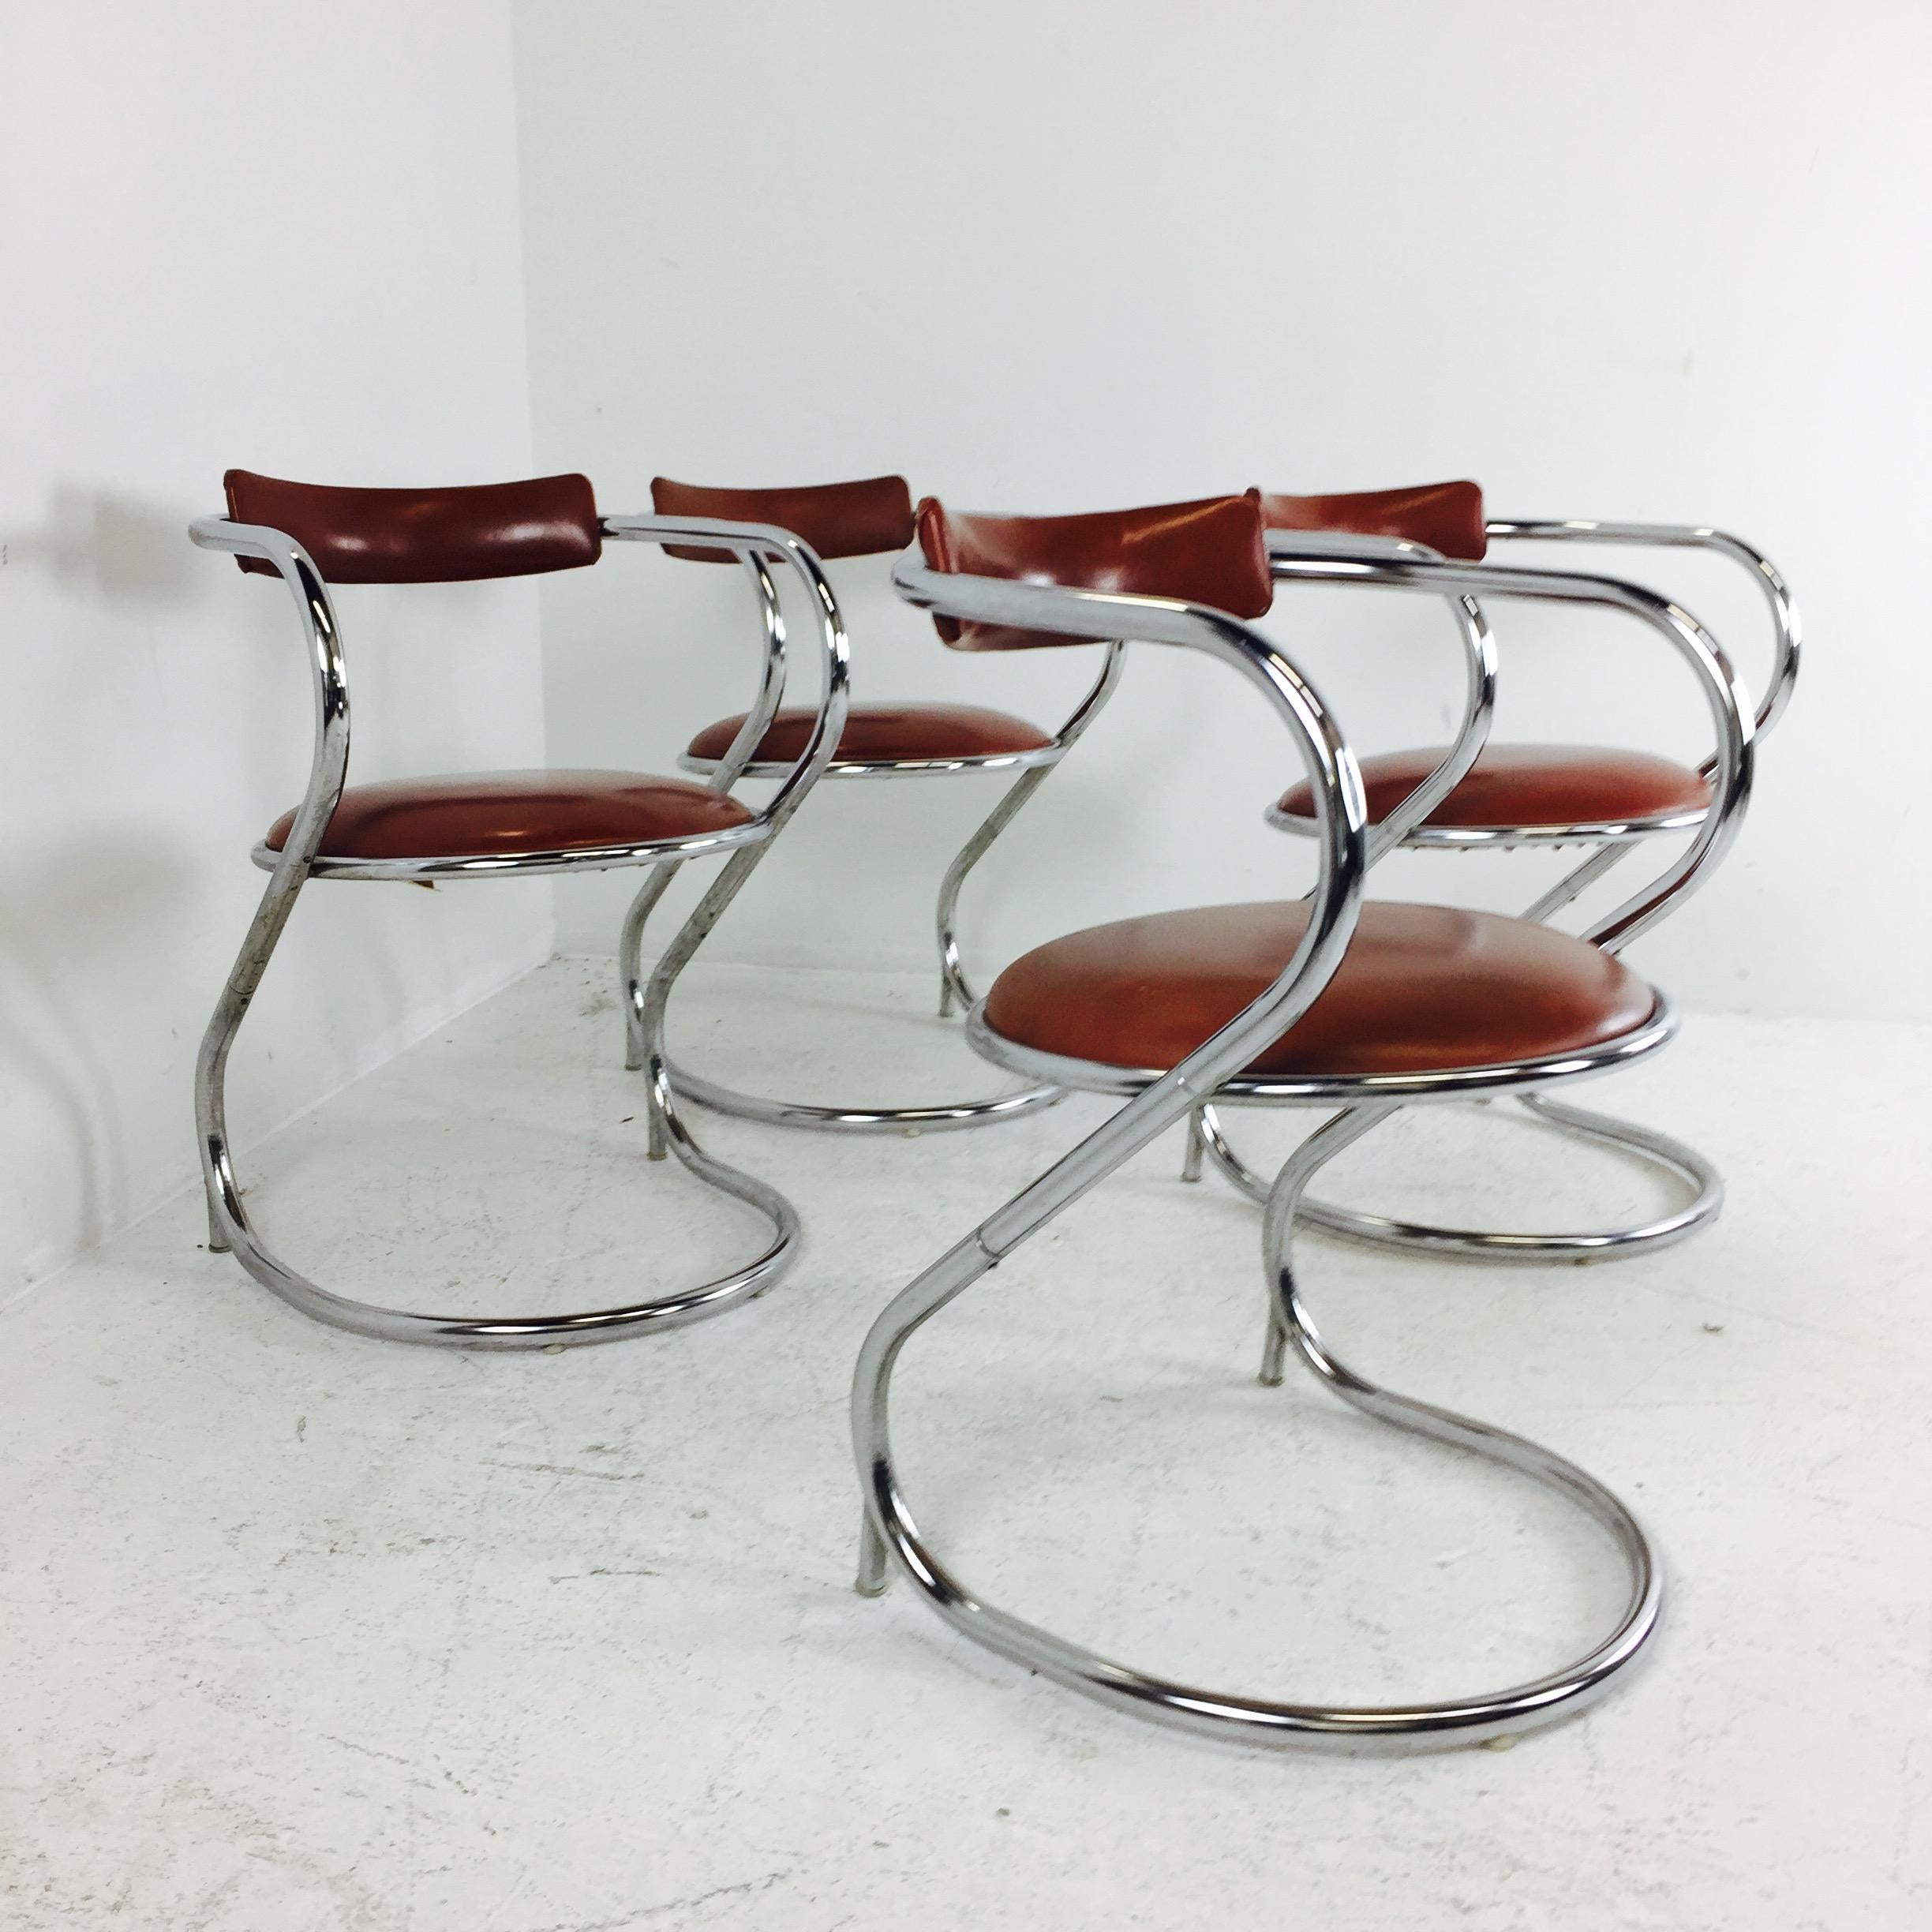 Plated Set of Four Vintage Midcentury Chrome Cantilever Dining Chairs